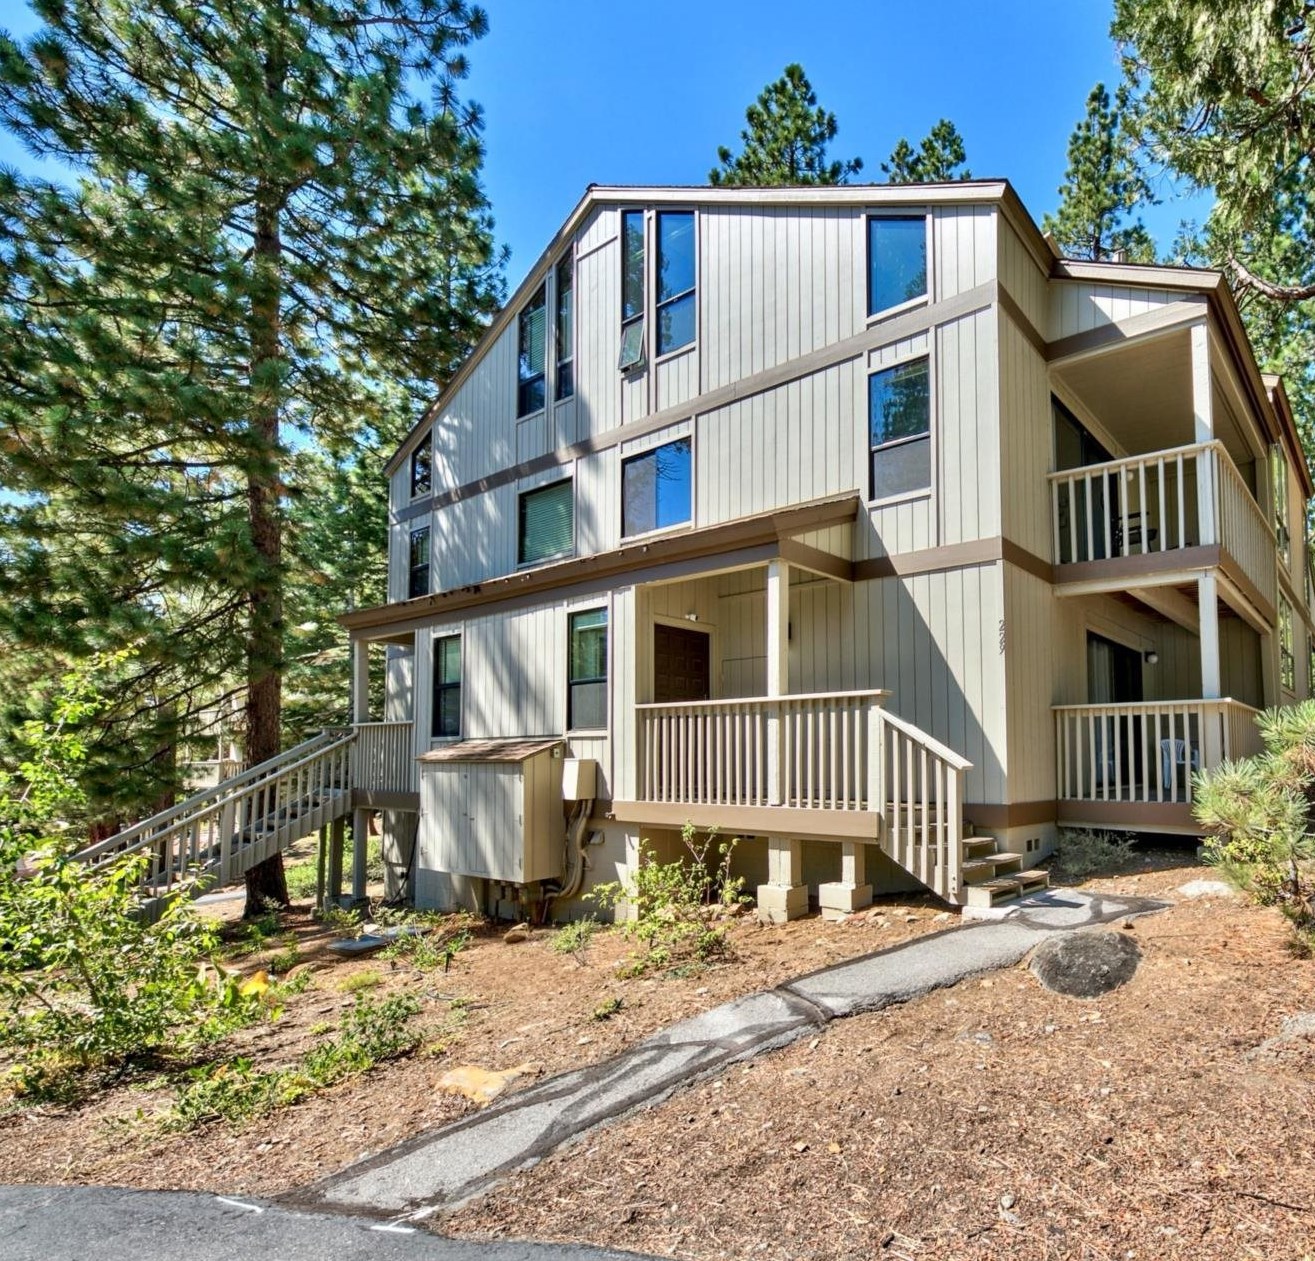 Image for 1001 Commonwealth Drive, Kings Beach, CA 96143-4509